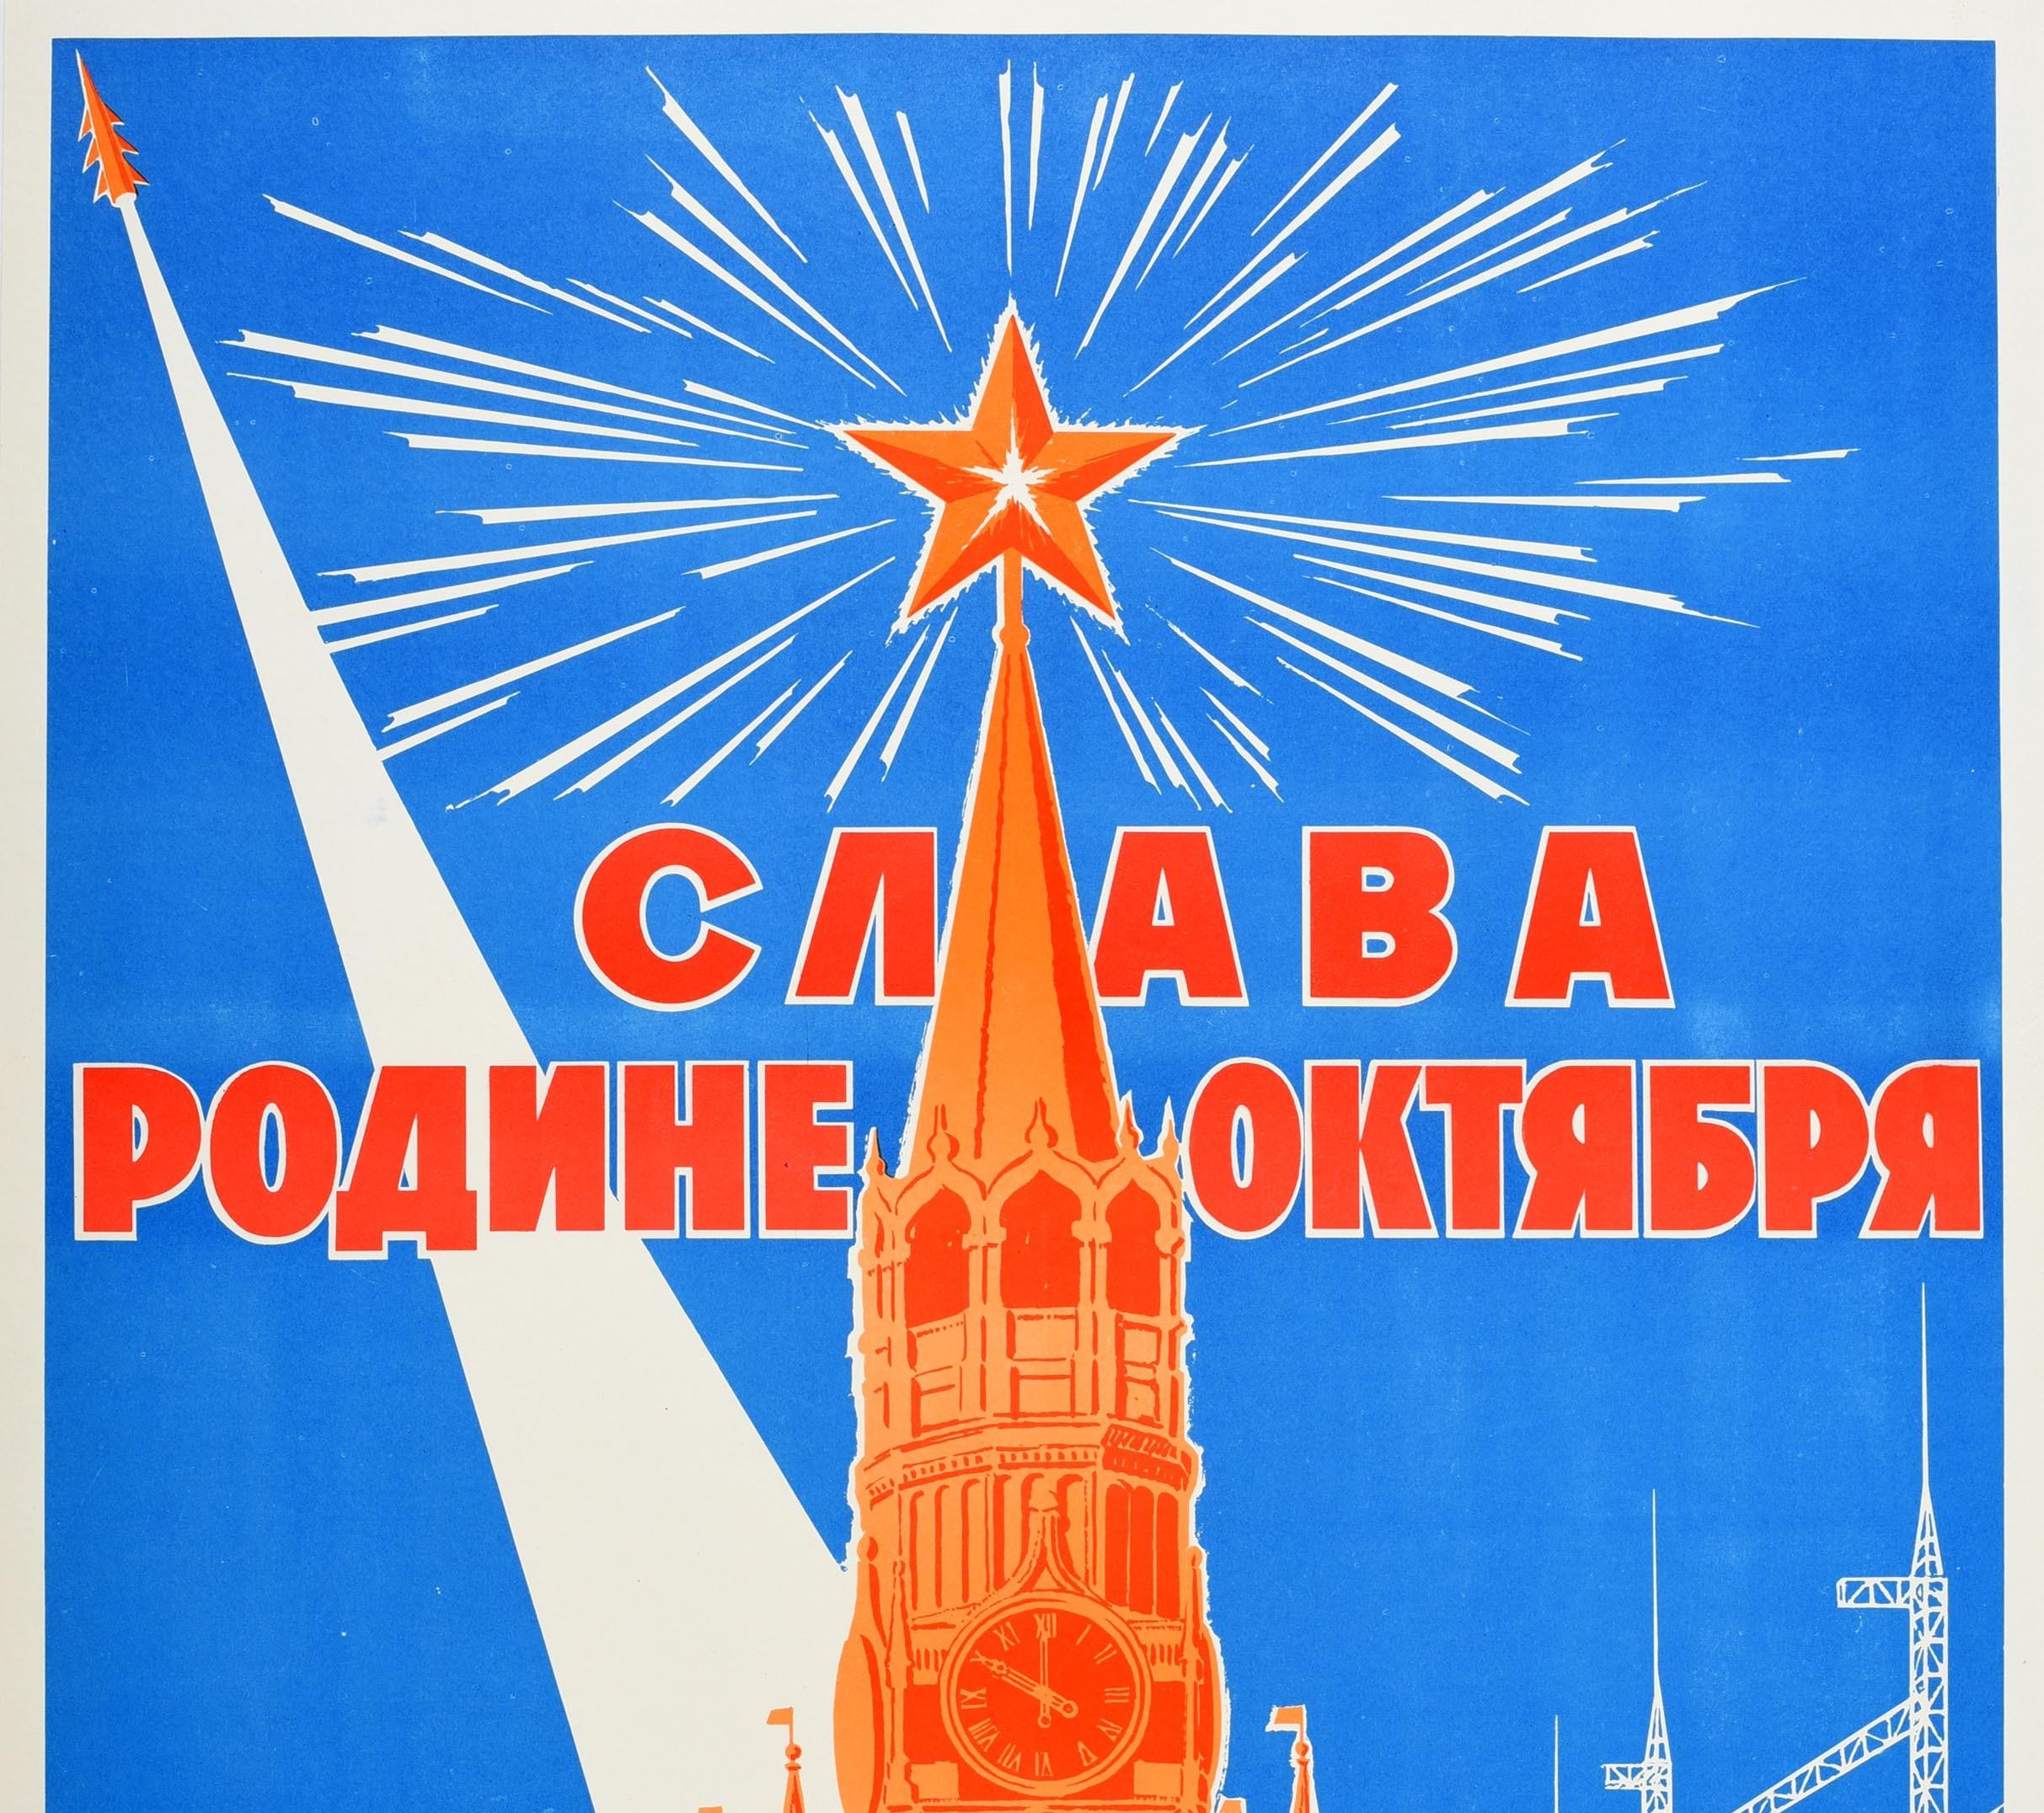 Original vintage Soviet propaganda poster - Glory to the birthplace of October the birthplace of Communism! / Слава родине октября родине коммунизма! Dynamic design featuring a hydro electrical station and industrial factory buildings with a large